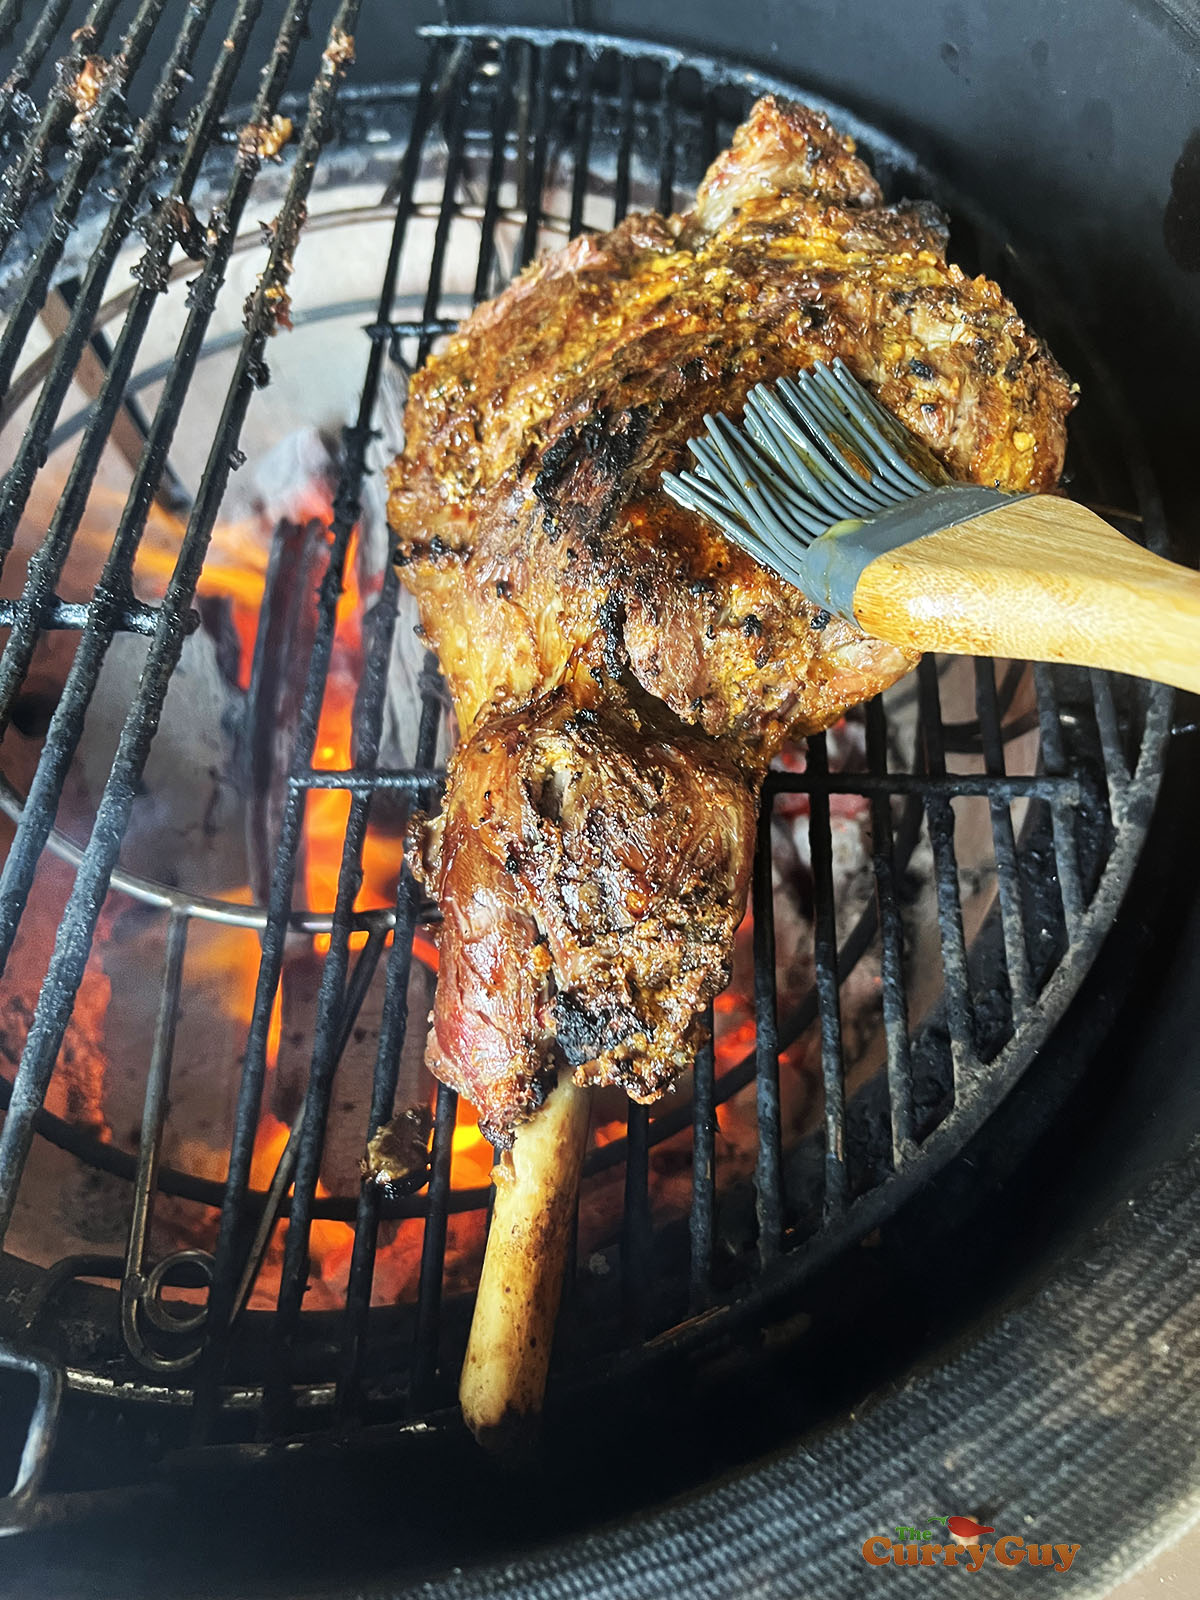 The lamb raan on a hot barbecue grill. 